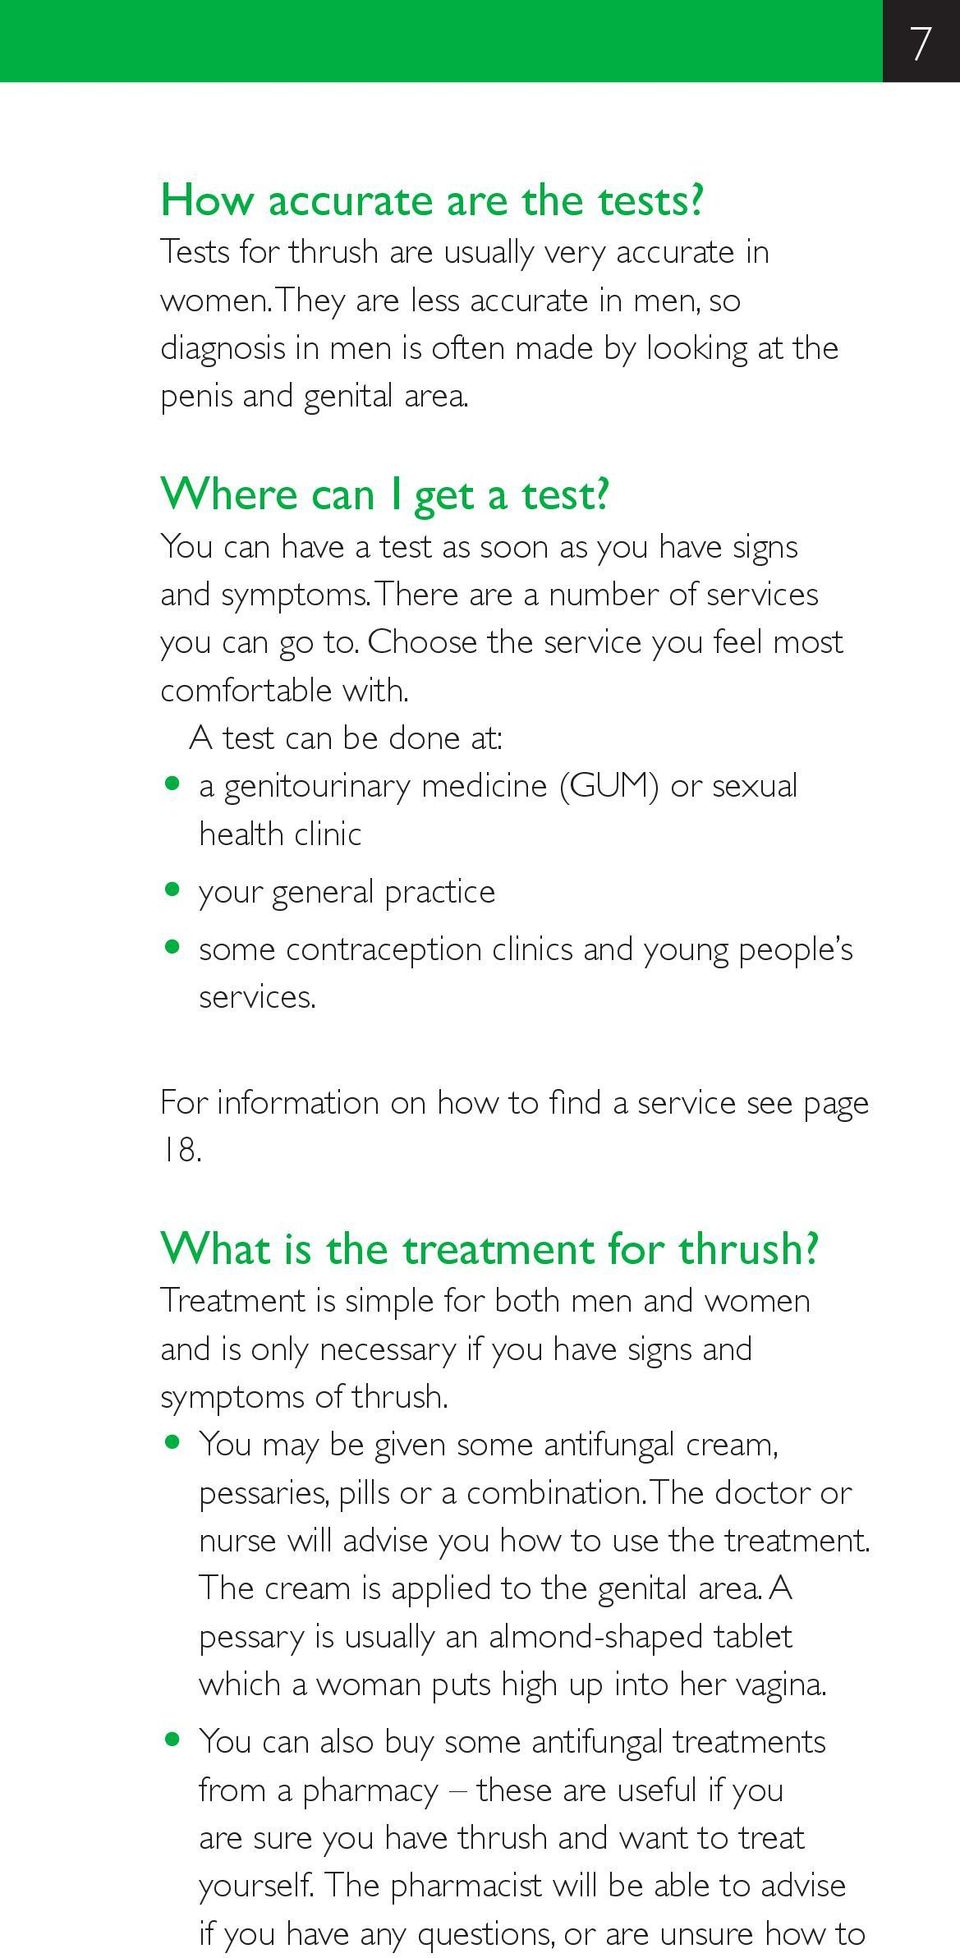 A test can be done at: O a genitourinary medicine (GUM) or sexual health clinic O your general practice O some contraception clinics and young people s services.